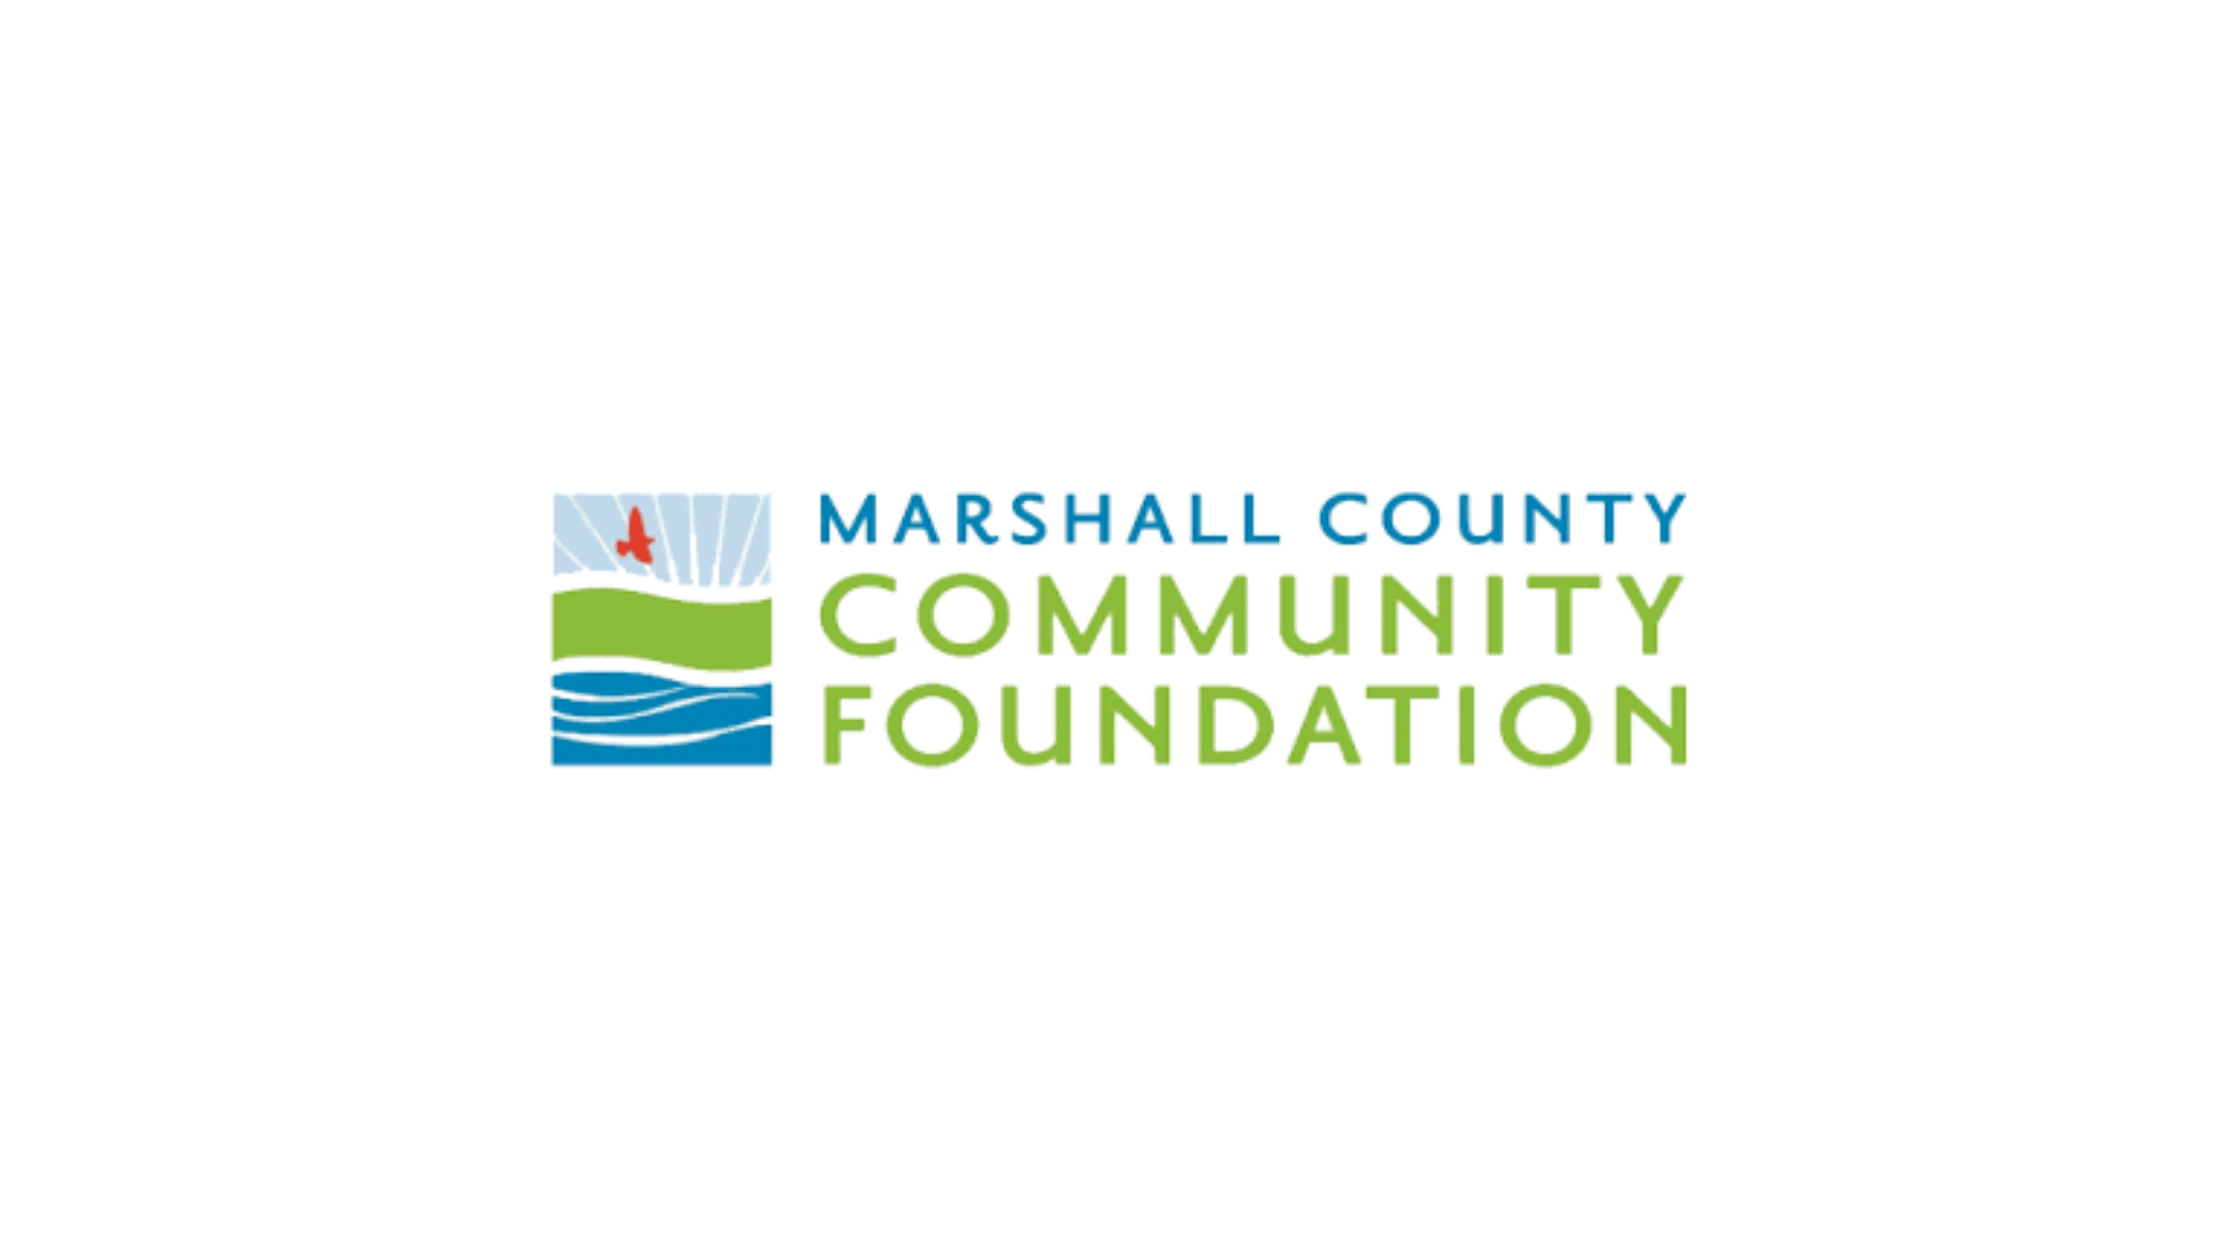 enFocus Promotes Lifelong Learning in Marshall County